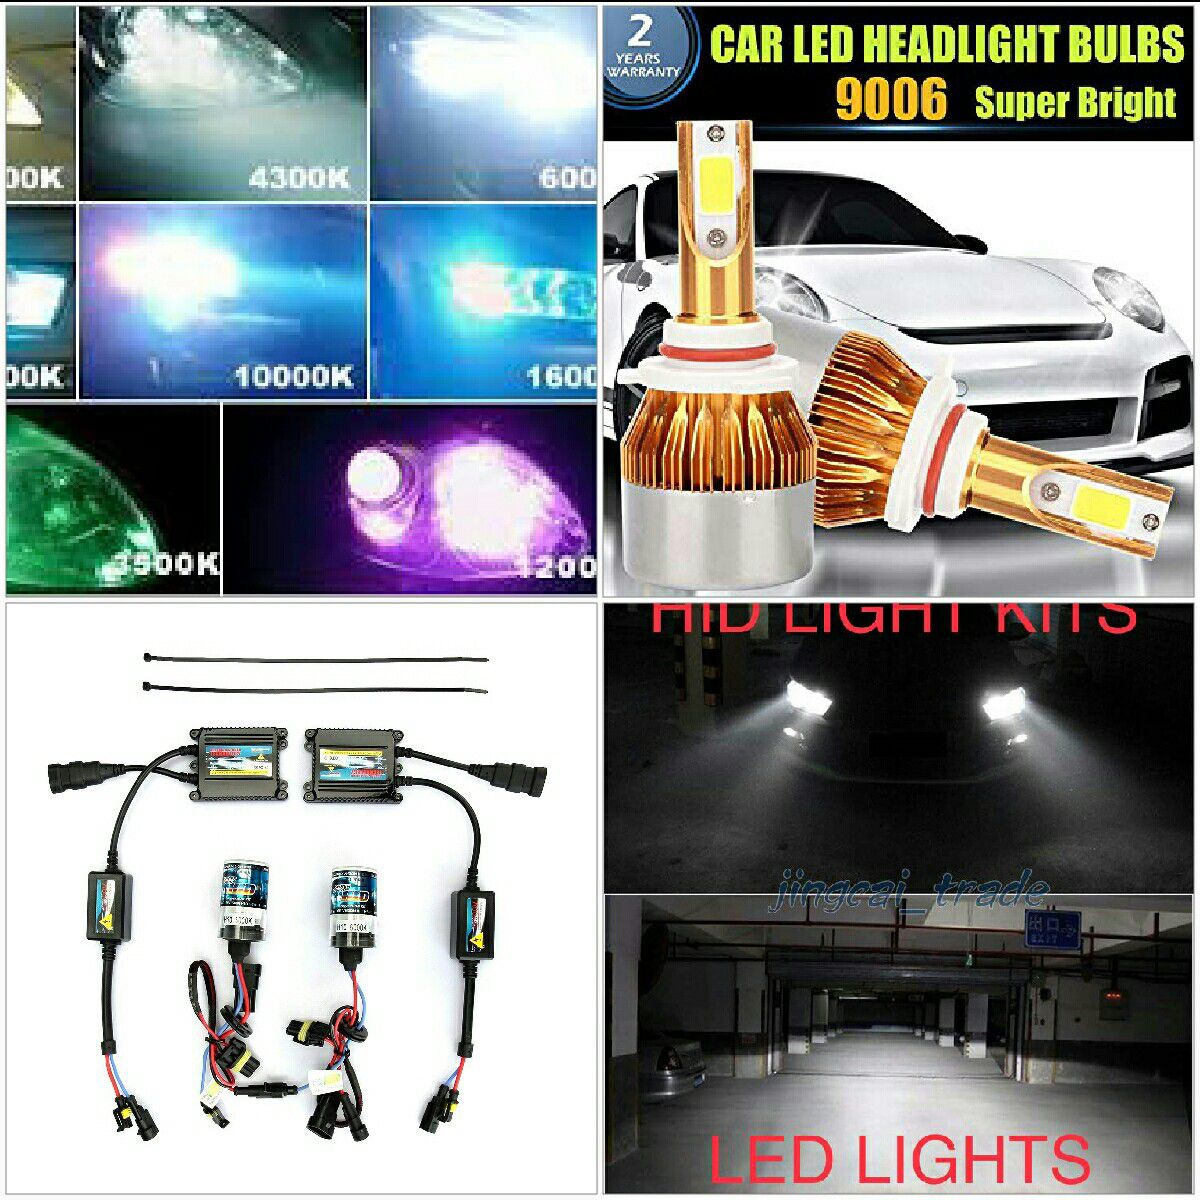 Led headlight bulbs and hid conversion lights kit- any ride dodge ram charger lexus gs300 nissan gmc Sierra scion any truck car